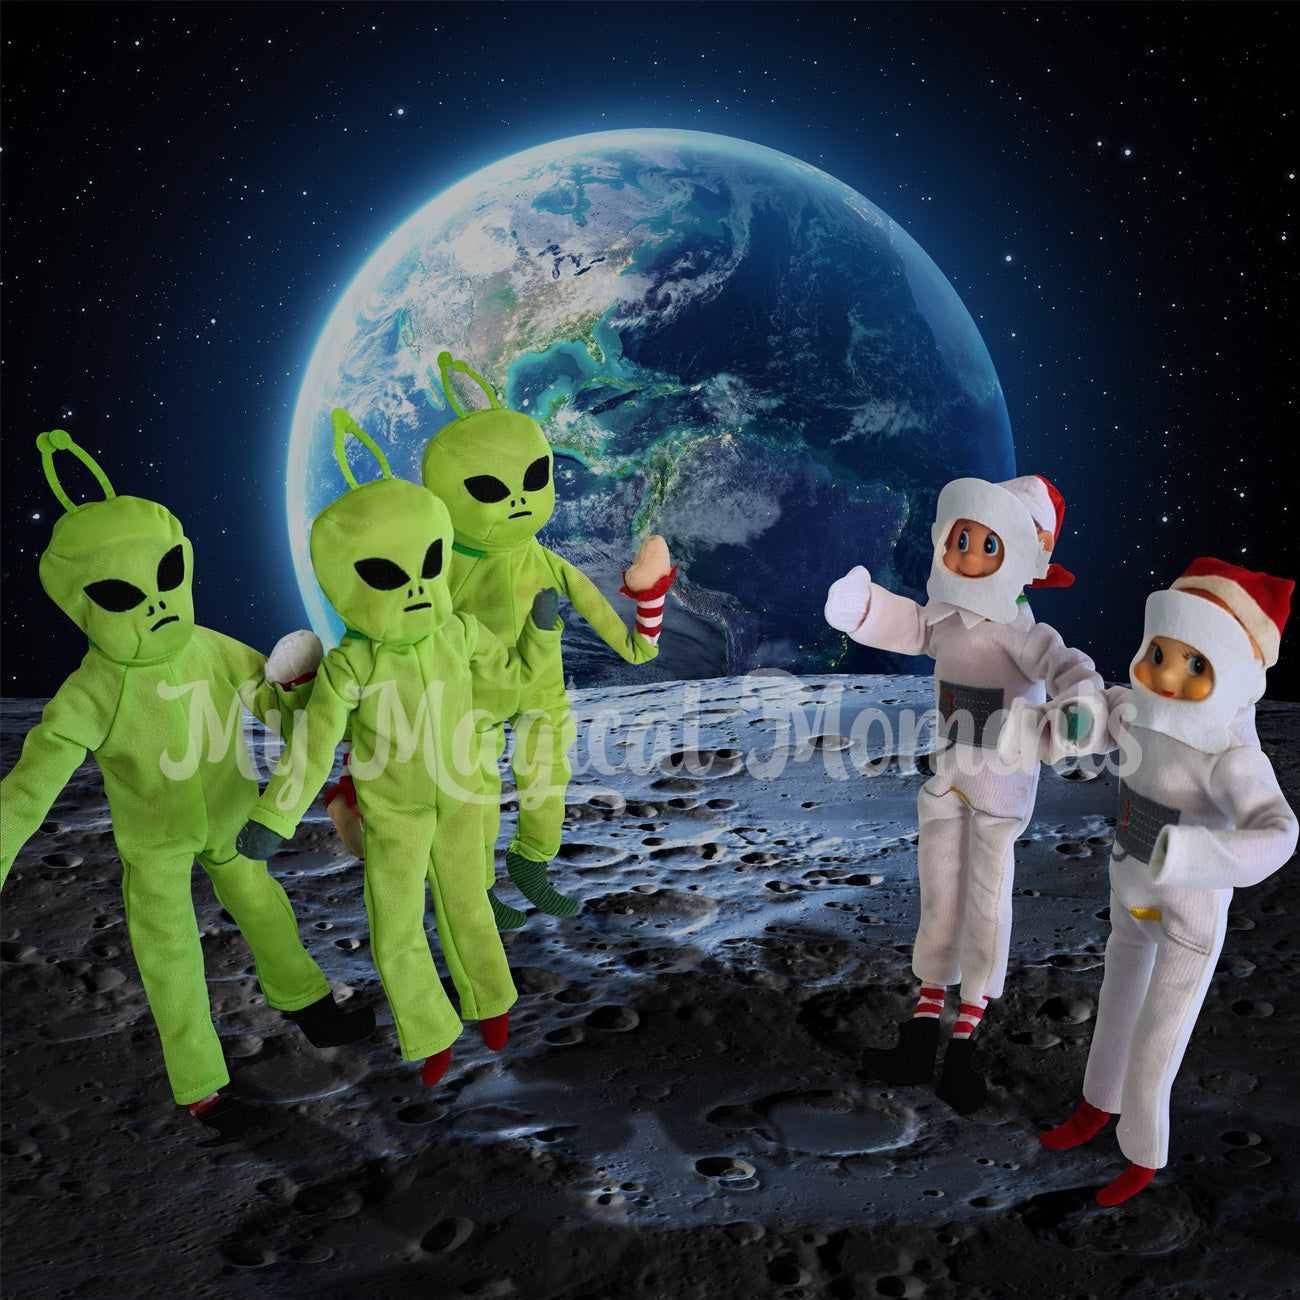 Elves dressed as aliens and astronauts coming in peace